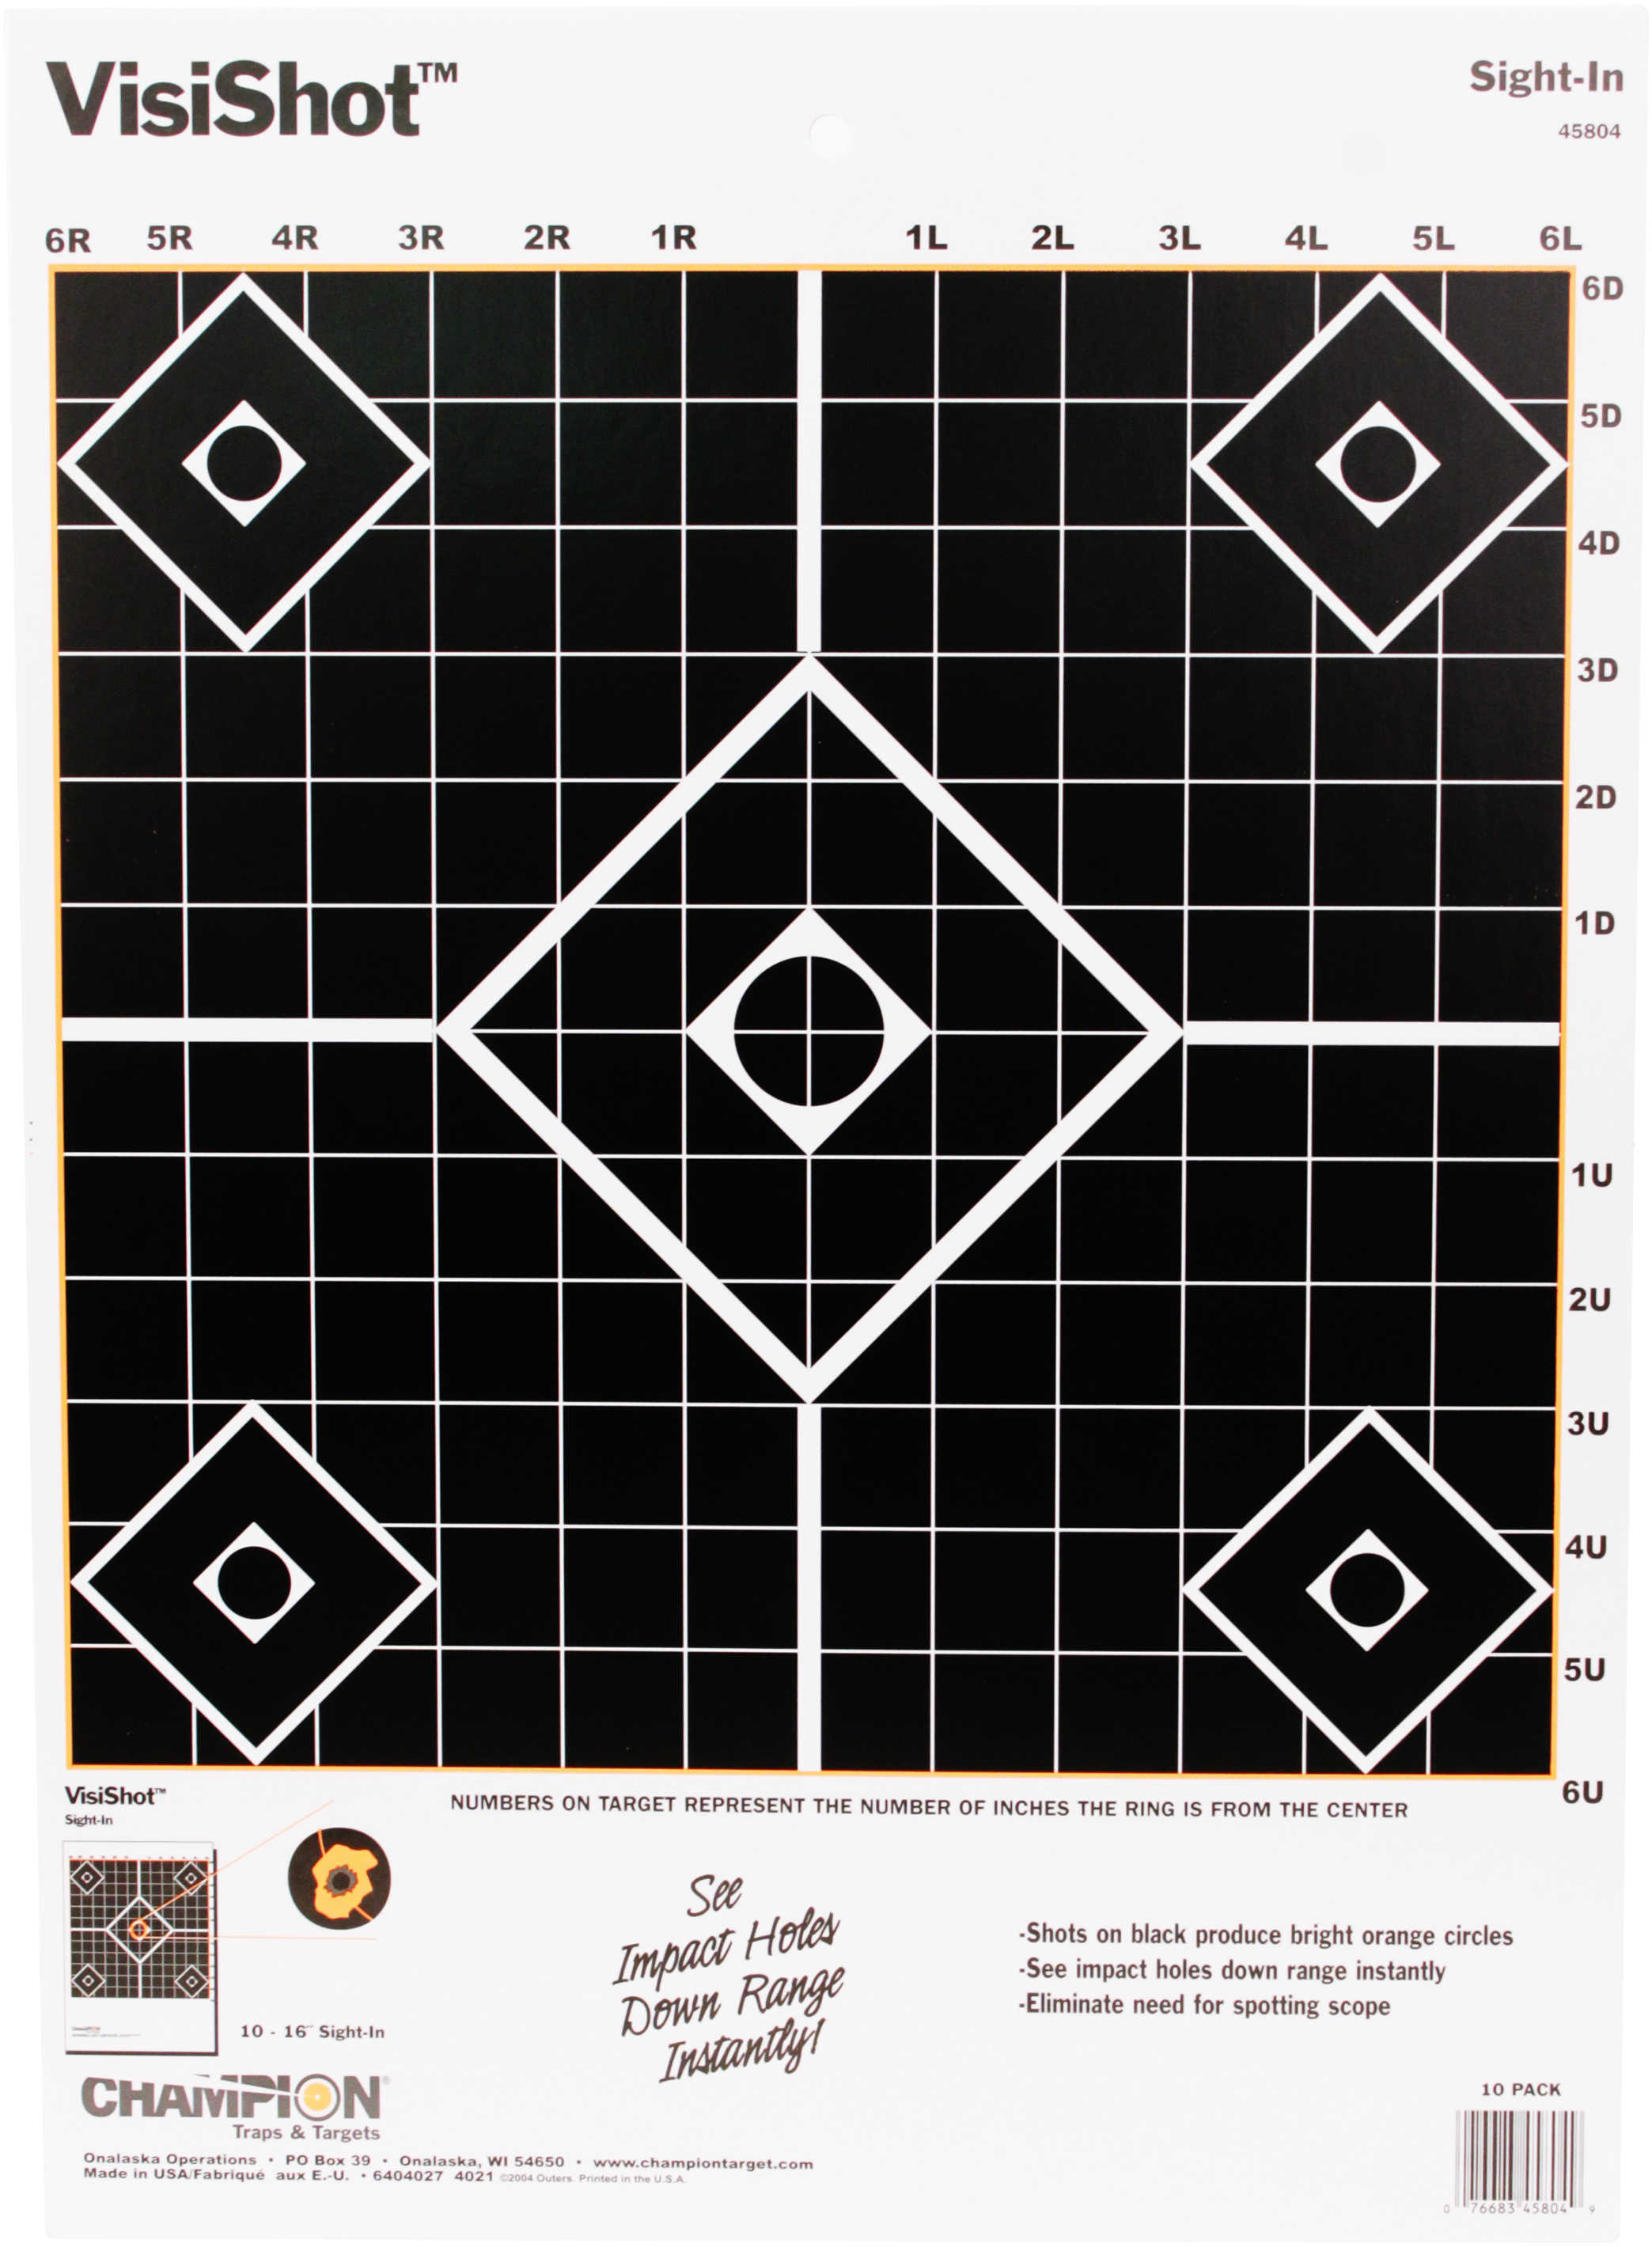 Champion Traps and Targets VisiShot Sight-In(10 Pack) 45804